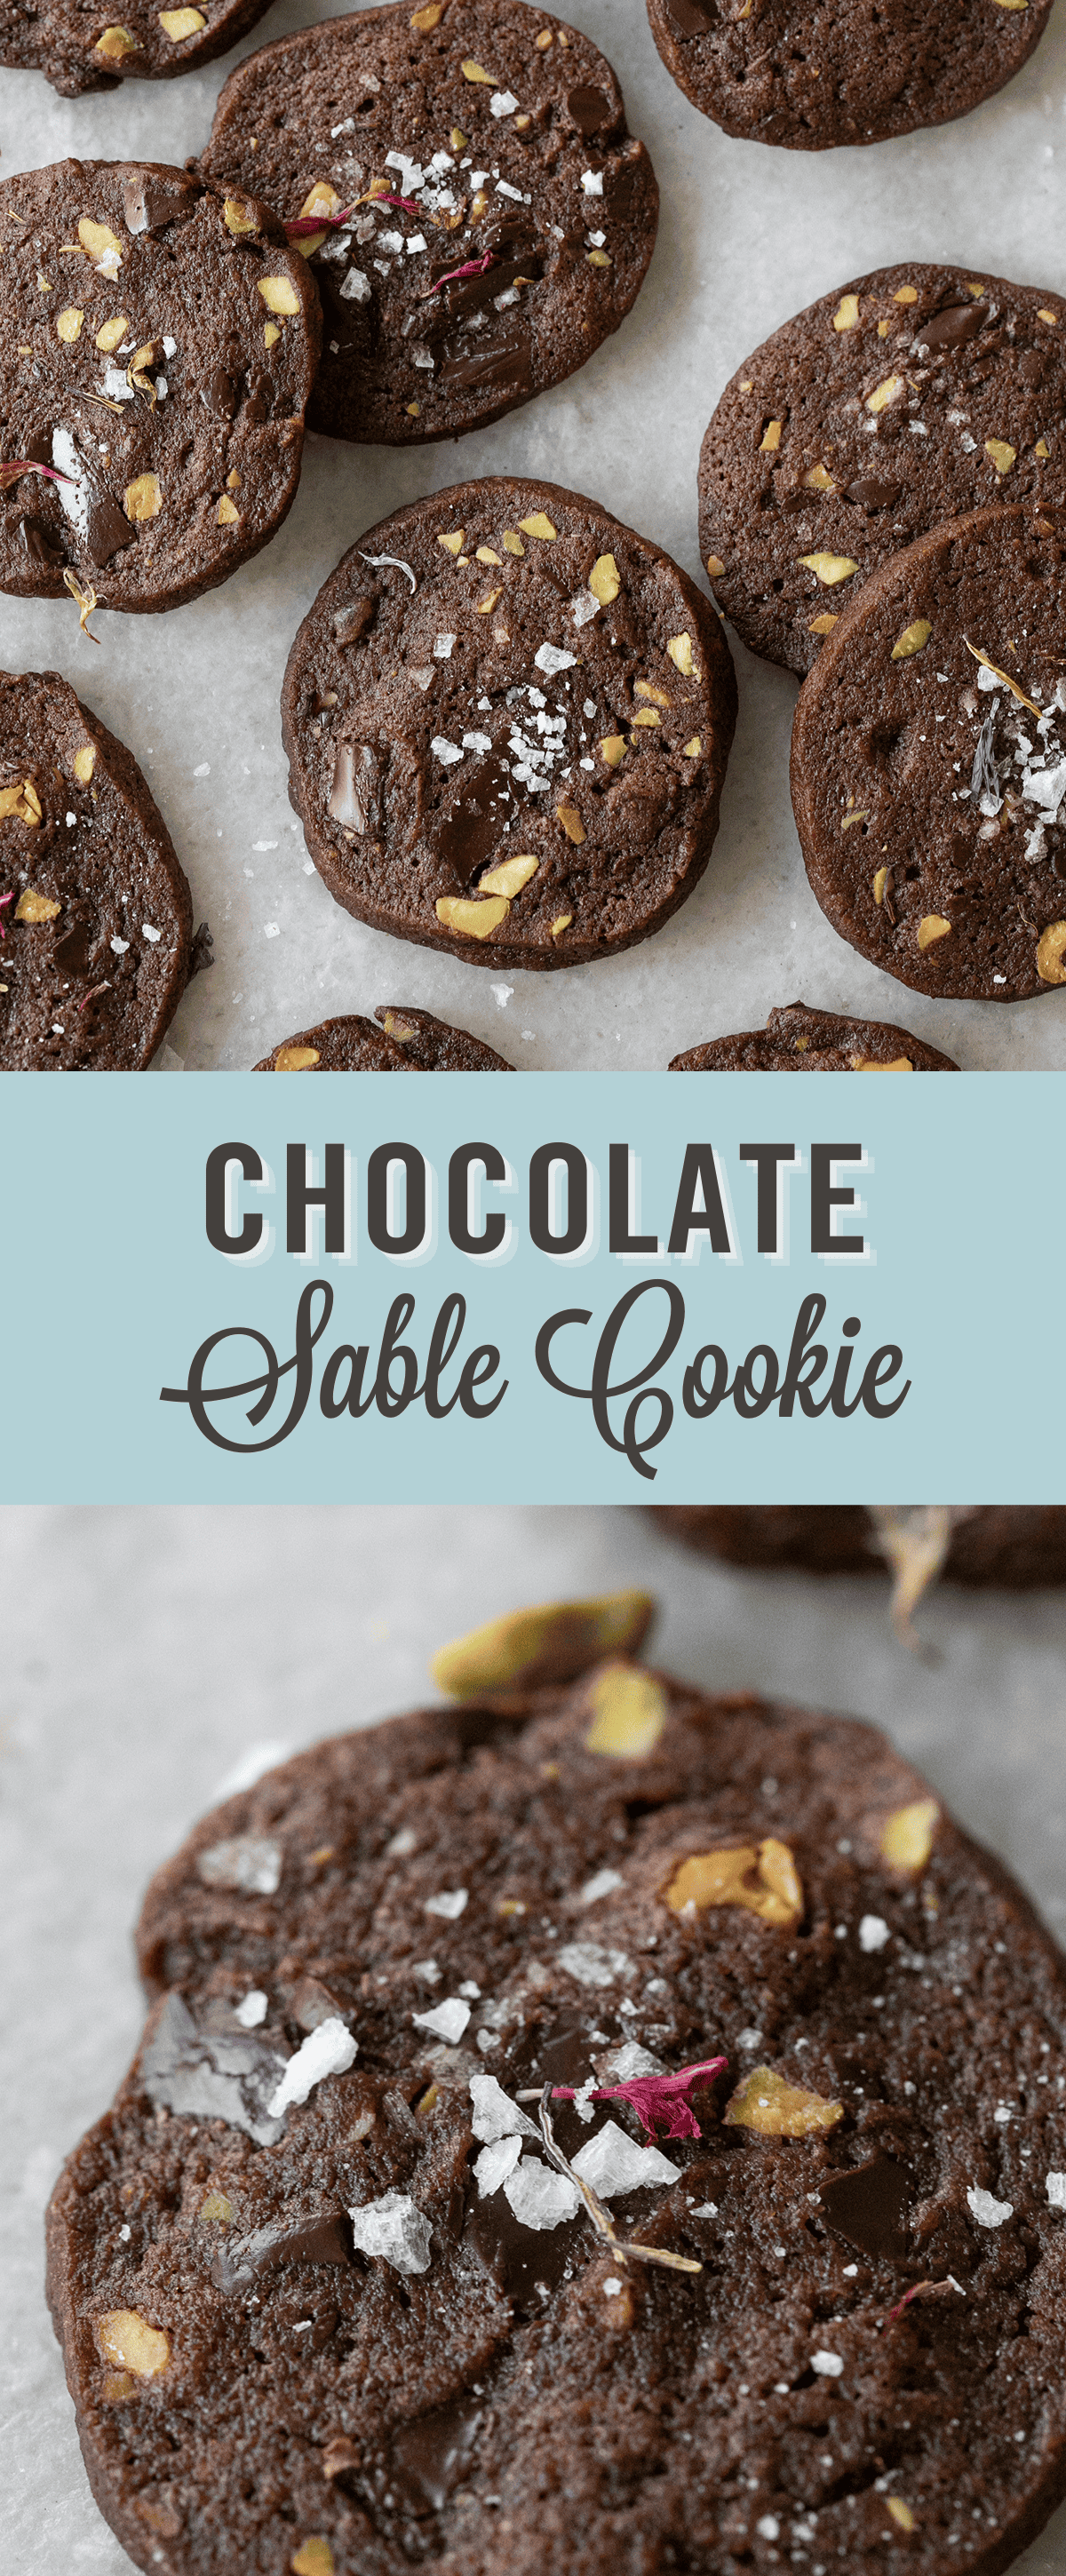 Chocolate sable cookie recipe with pistachios.